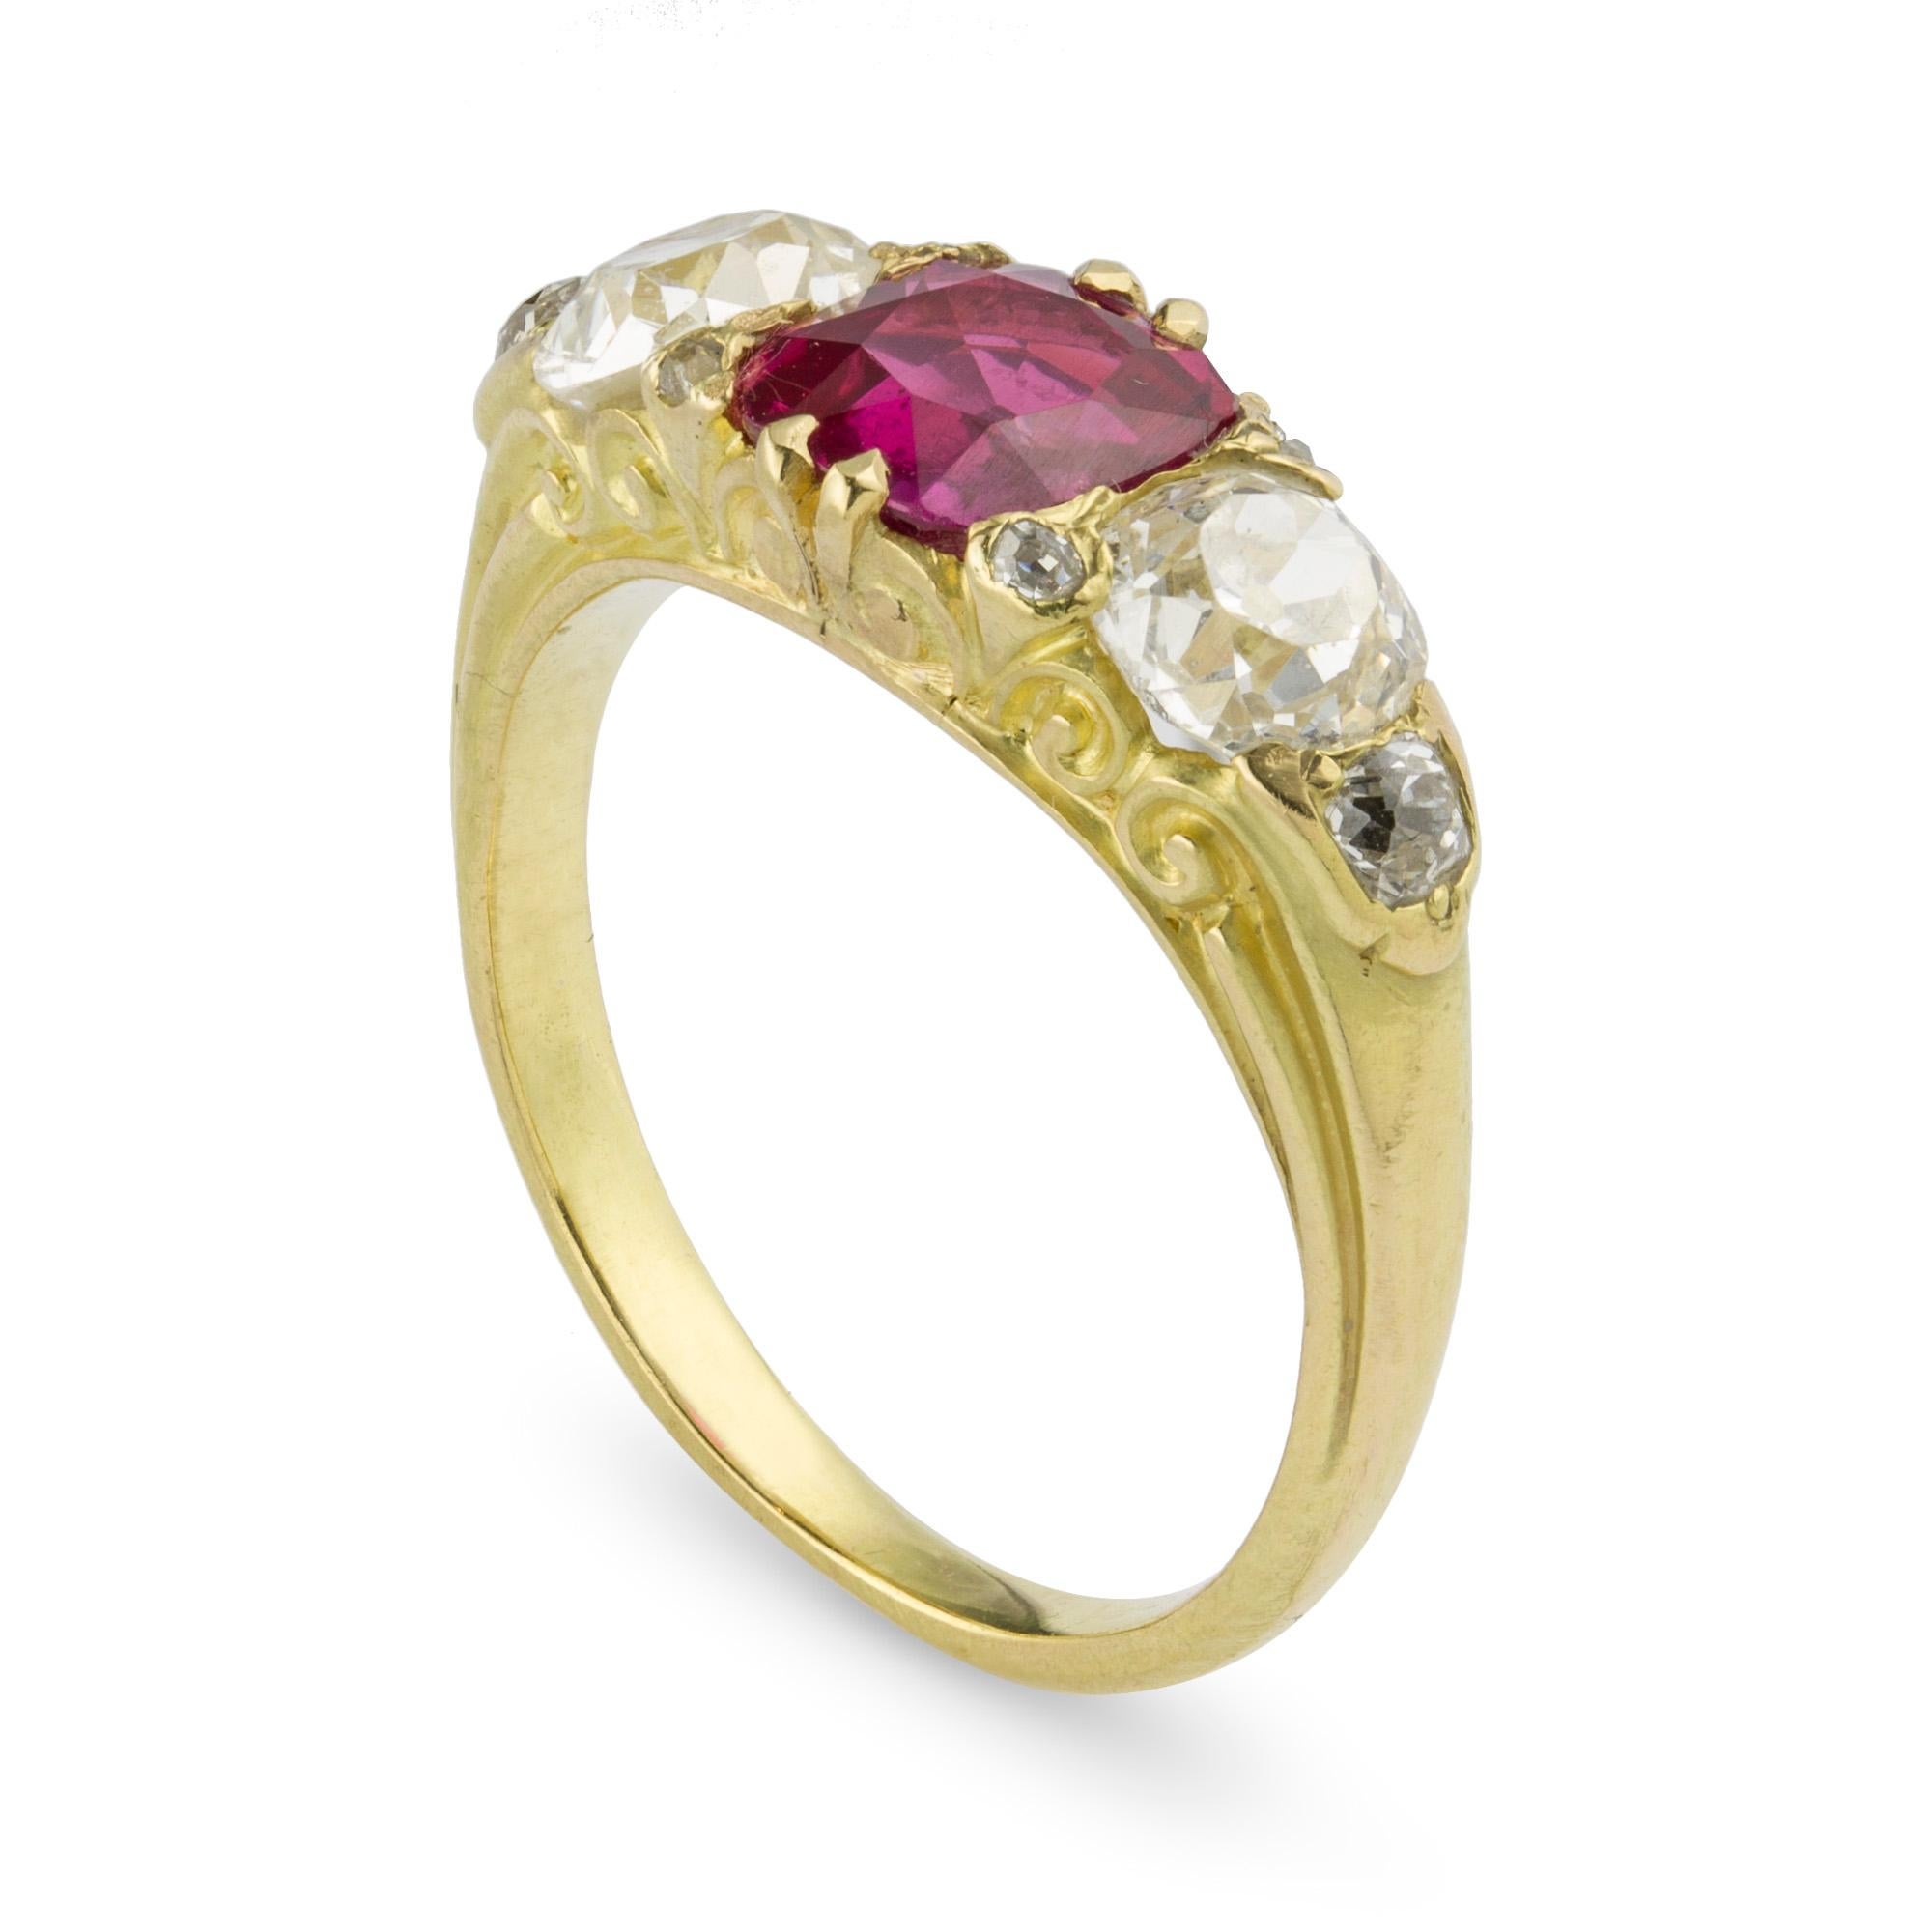 A Victorian three stone ruby and diamond ring, the ruby weighing 1.53 carats,  accompanied by GCS report number 79185-47 stating the ruby to of Burmese origin, with no indication of heating, set between two old brilliant-cut diamonds with an